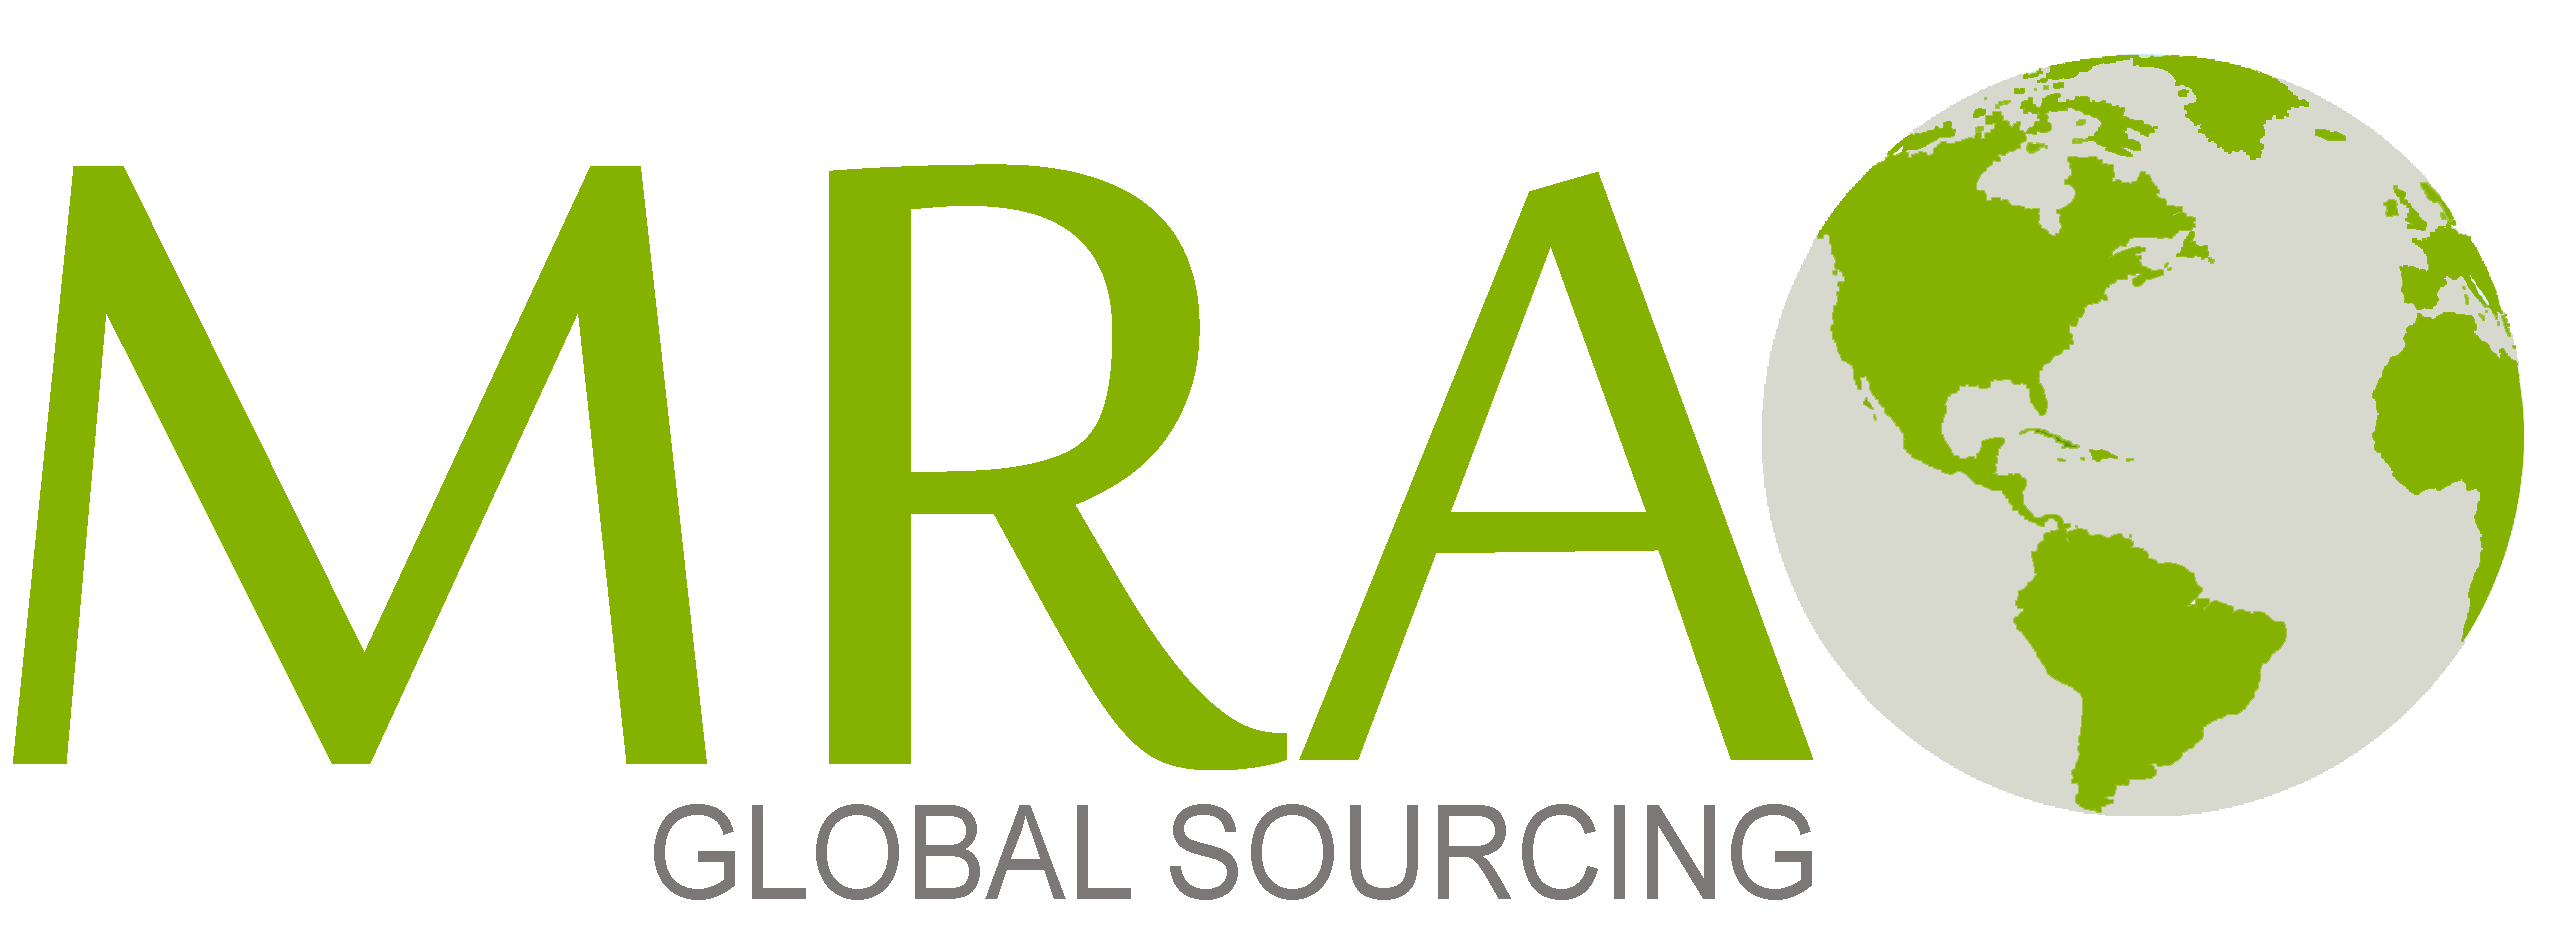 MRA Global Sourcing – Client Logos, Supply Chain